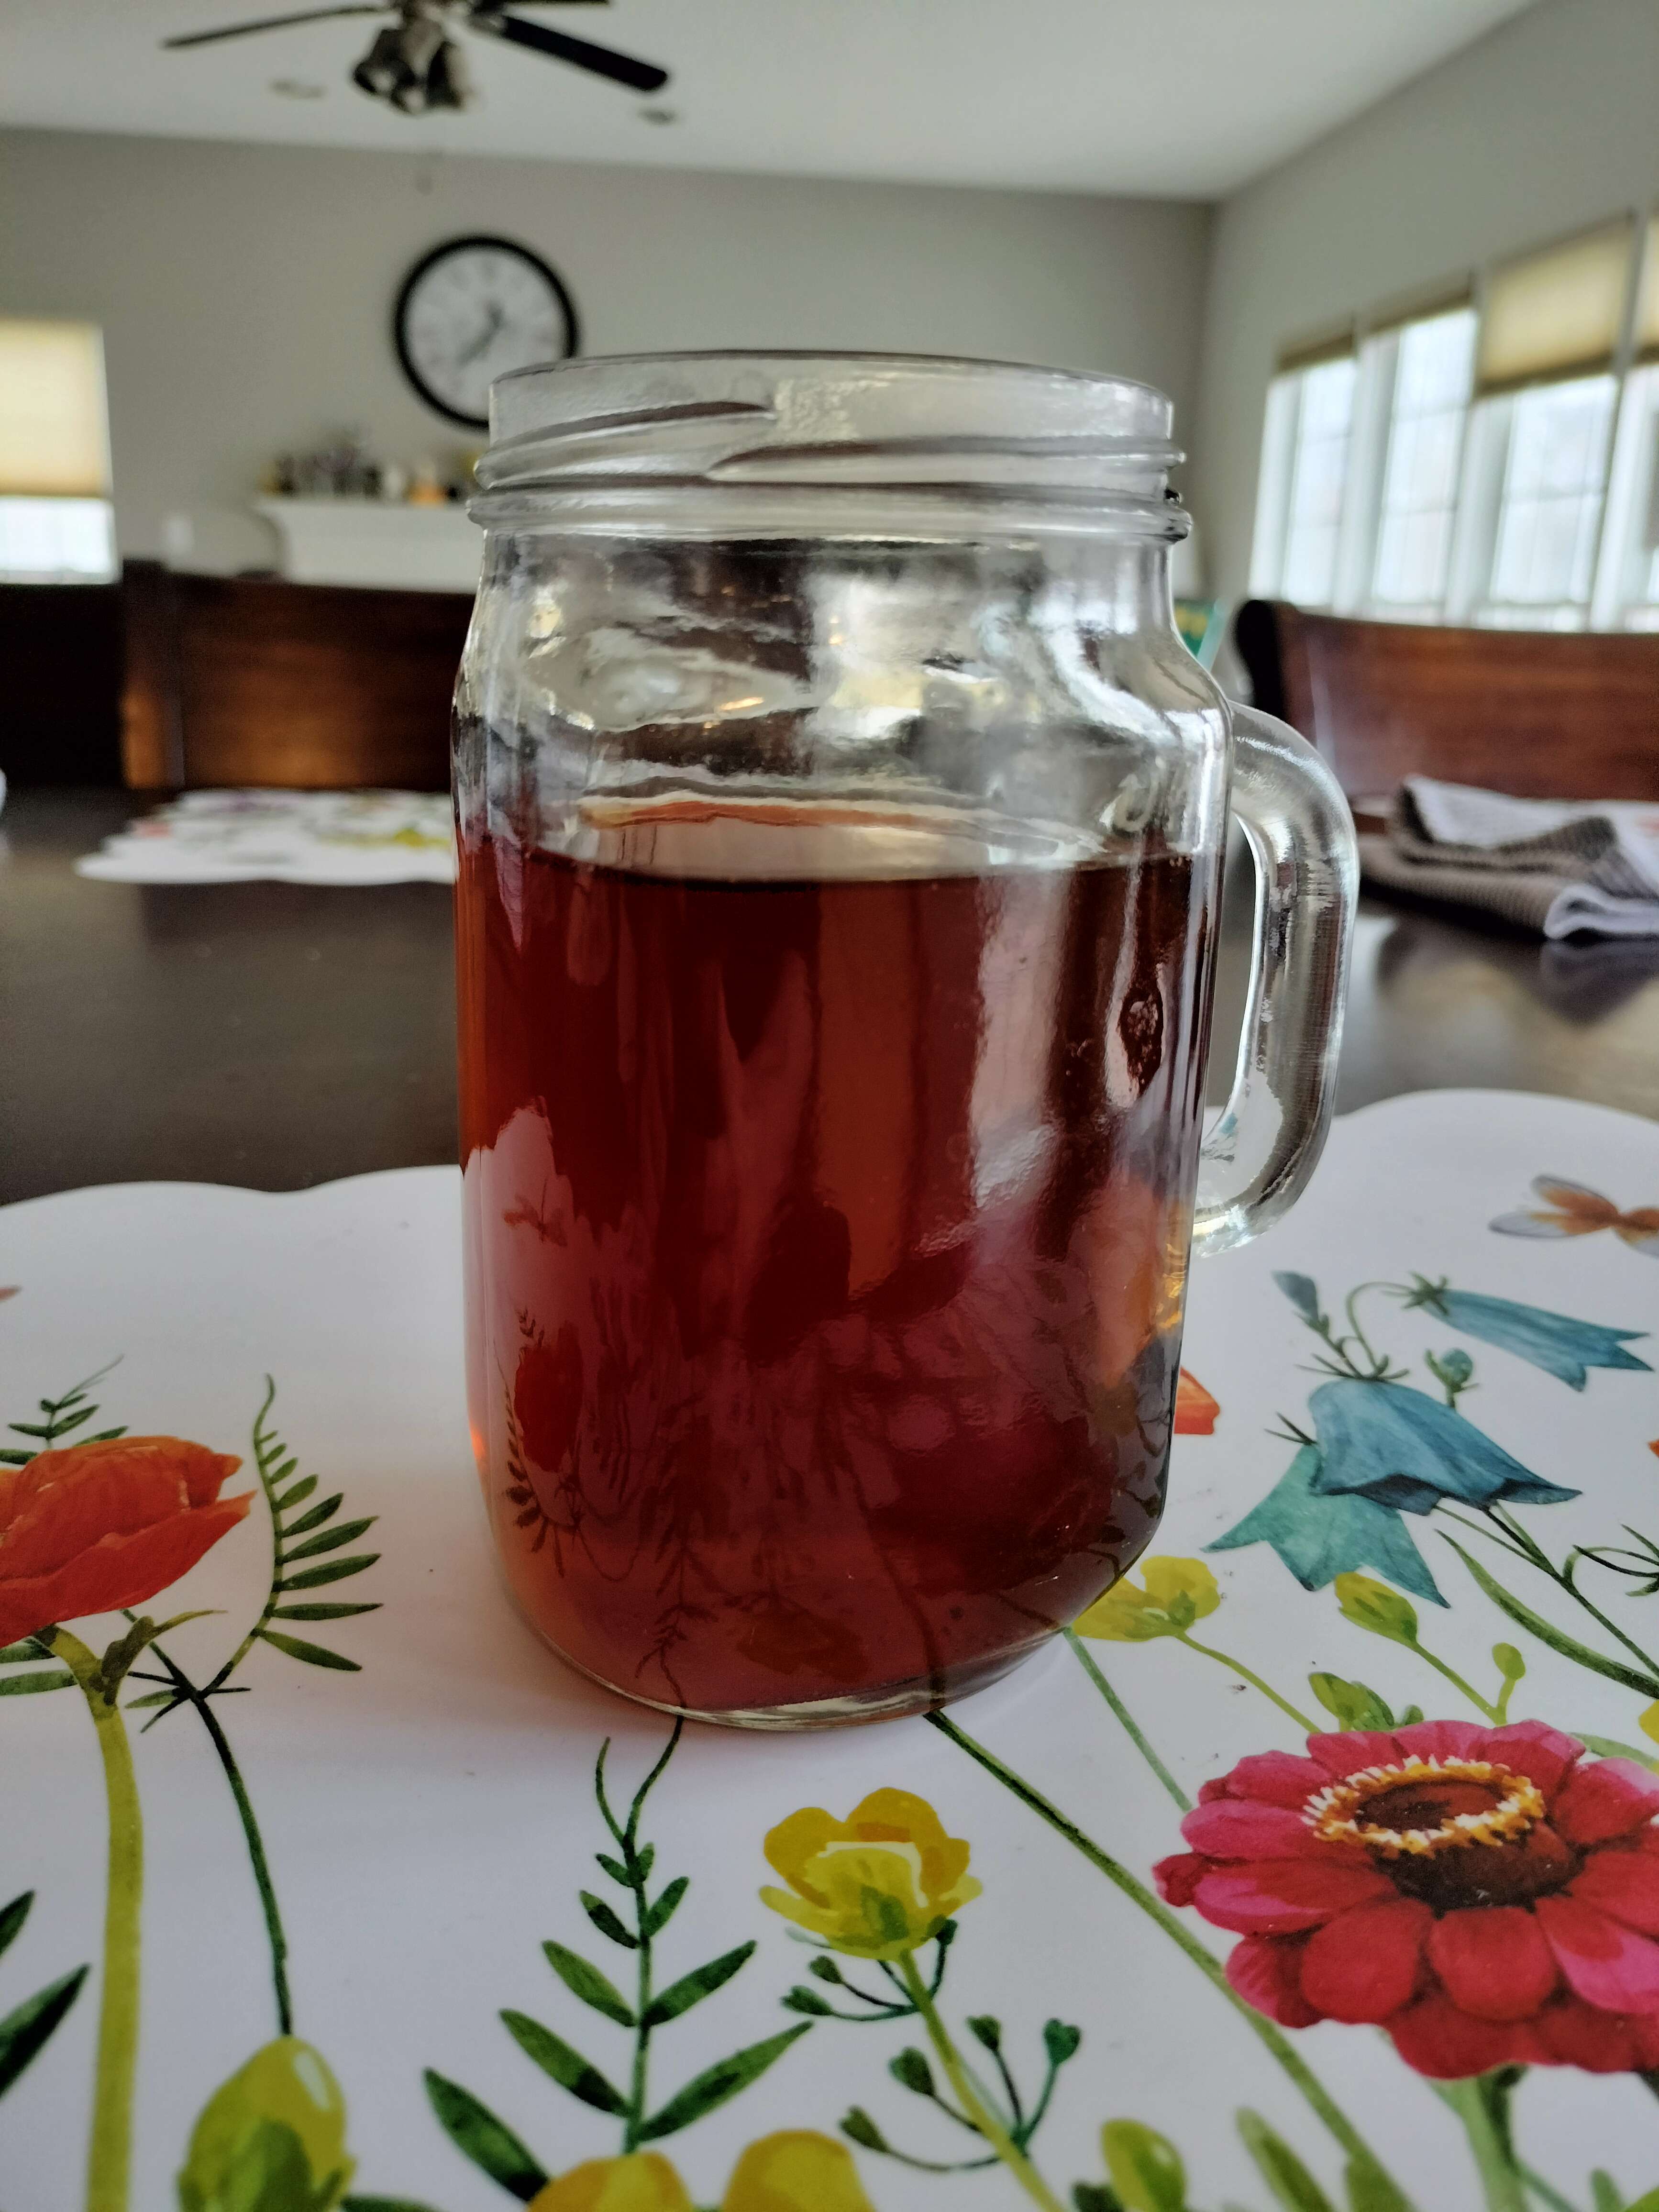 A tall glass mug with a handle on one end, not quite full. The tea is a rich red-brown.